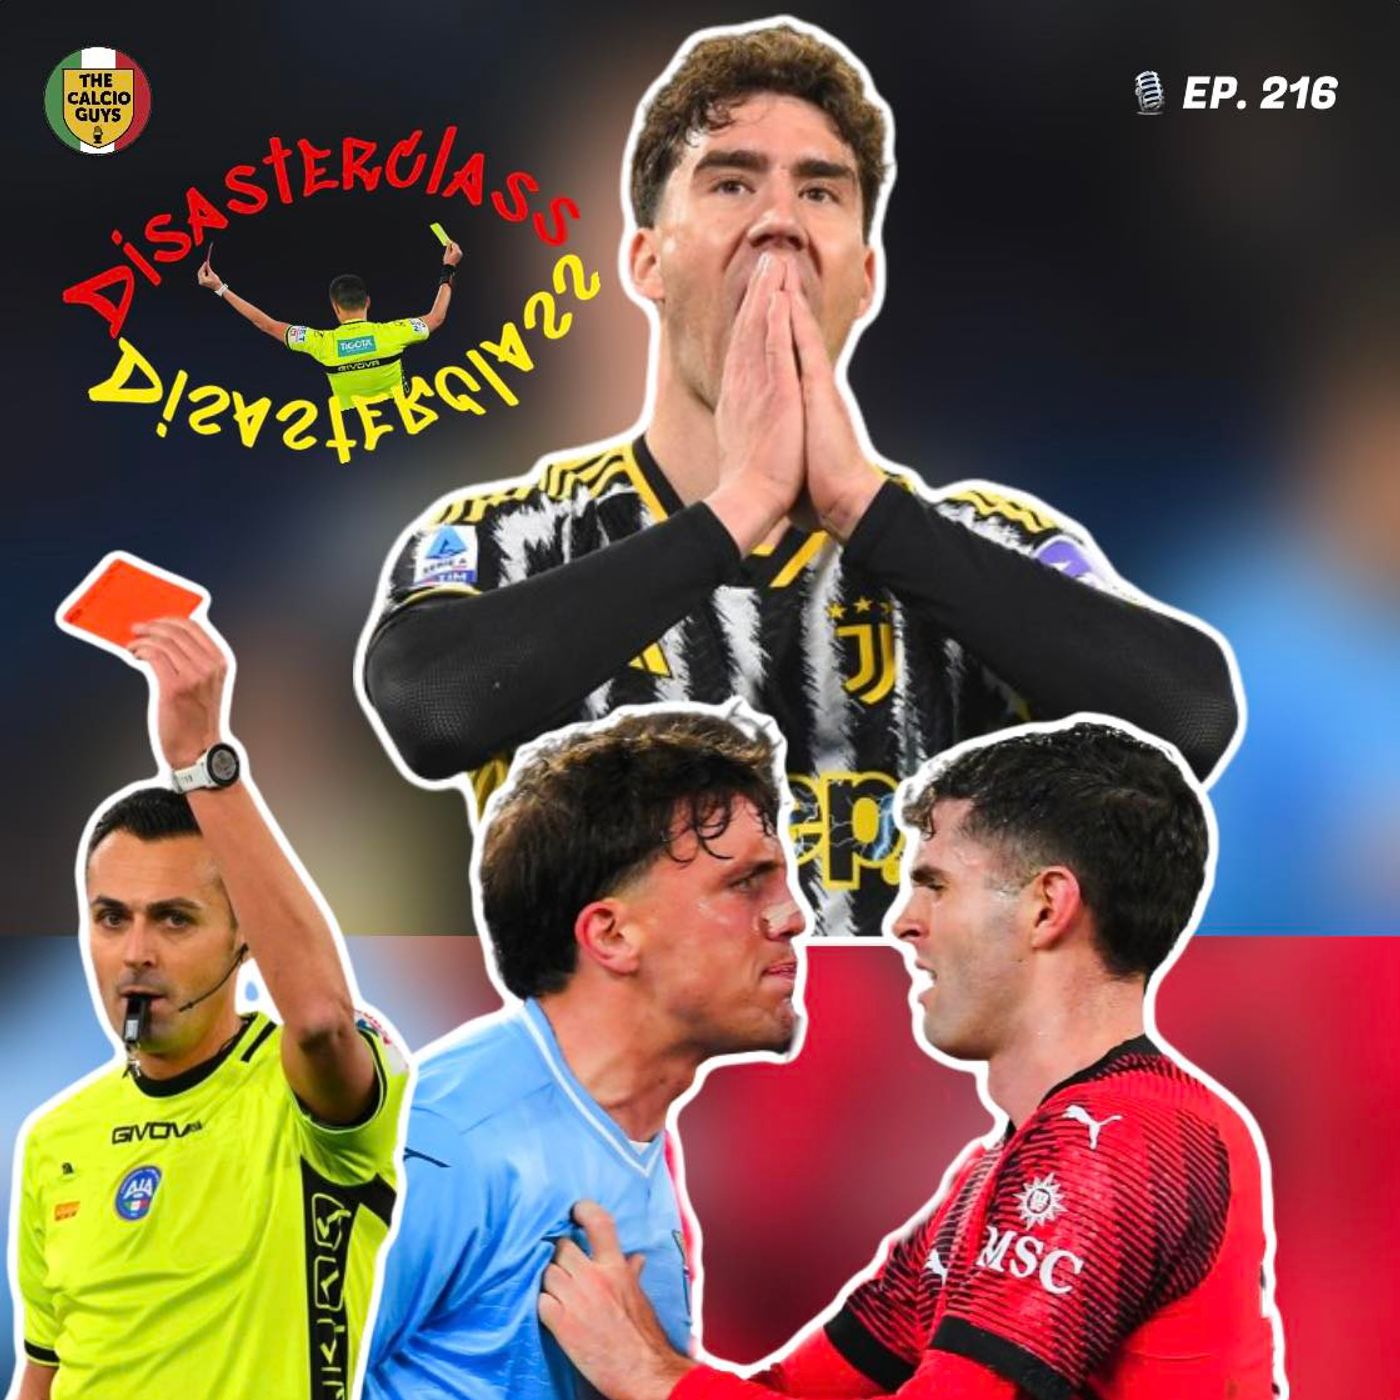 Calcio Carousel Serie A Matchday 27 - Is there a ref problem? Ep. 216